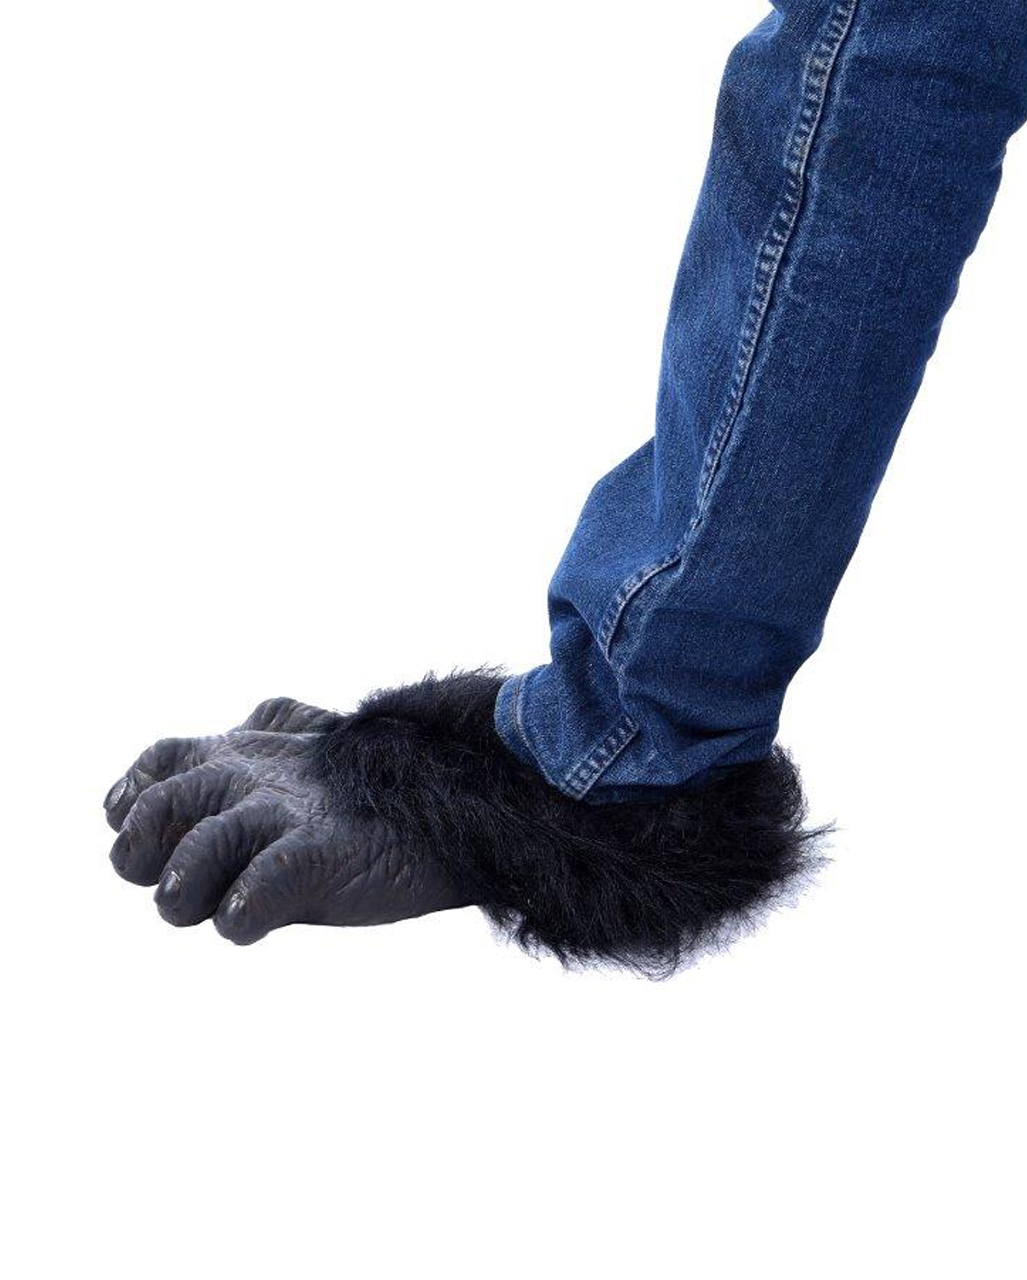 Gorilla Hairy Hands Monkey Chimps #Paws Halloween Fancy Dress Costume Accessory 